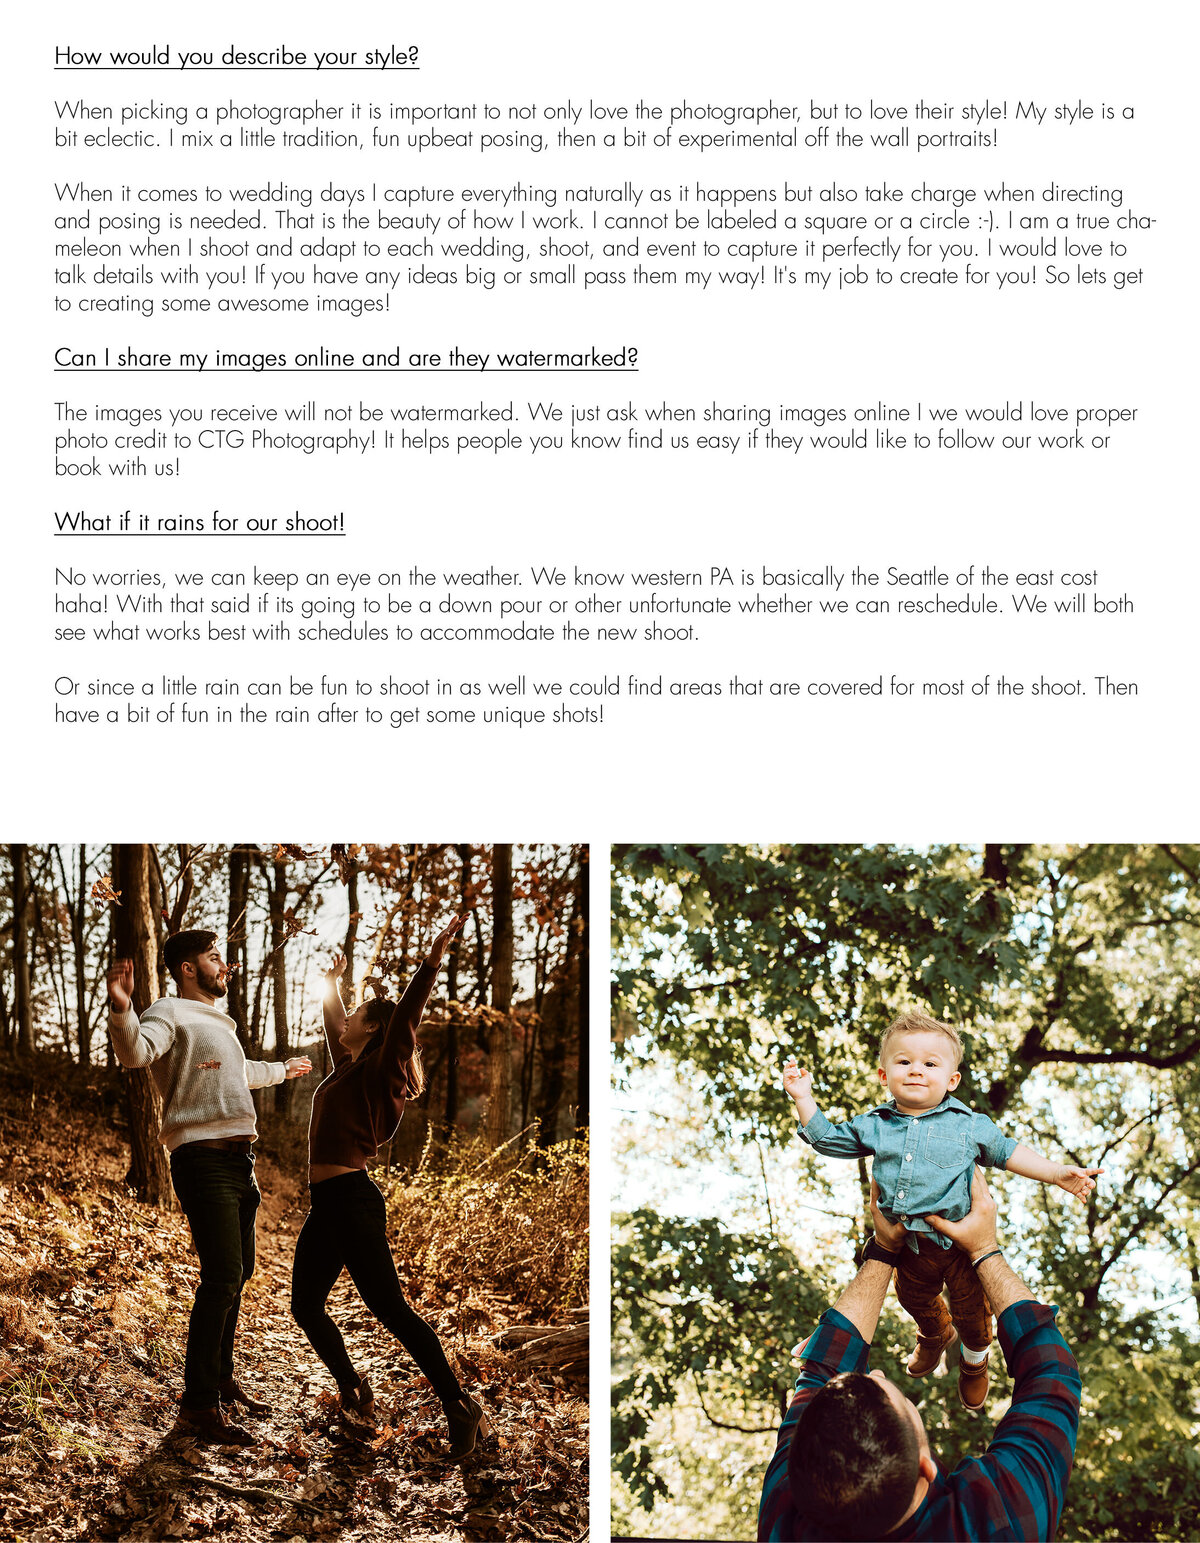 Info About CTG Photography-Pgh Photographer2